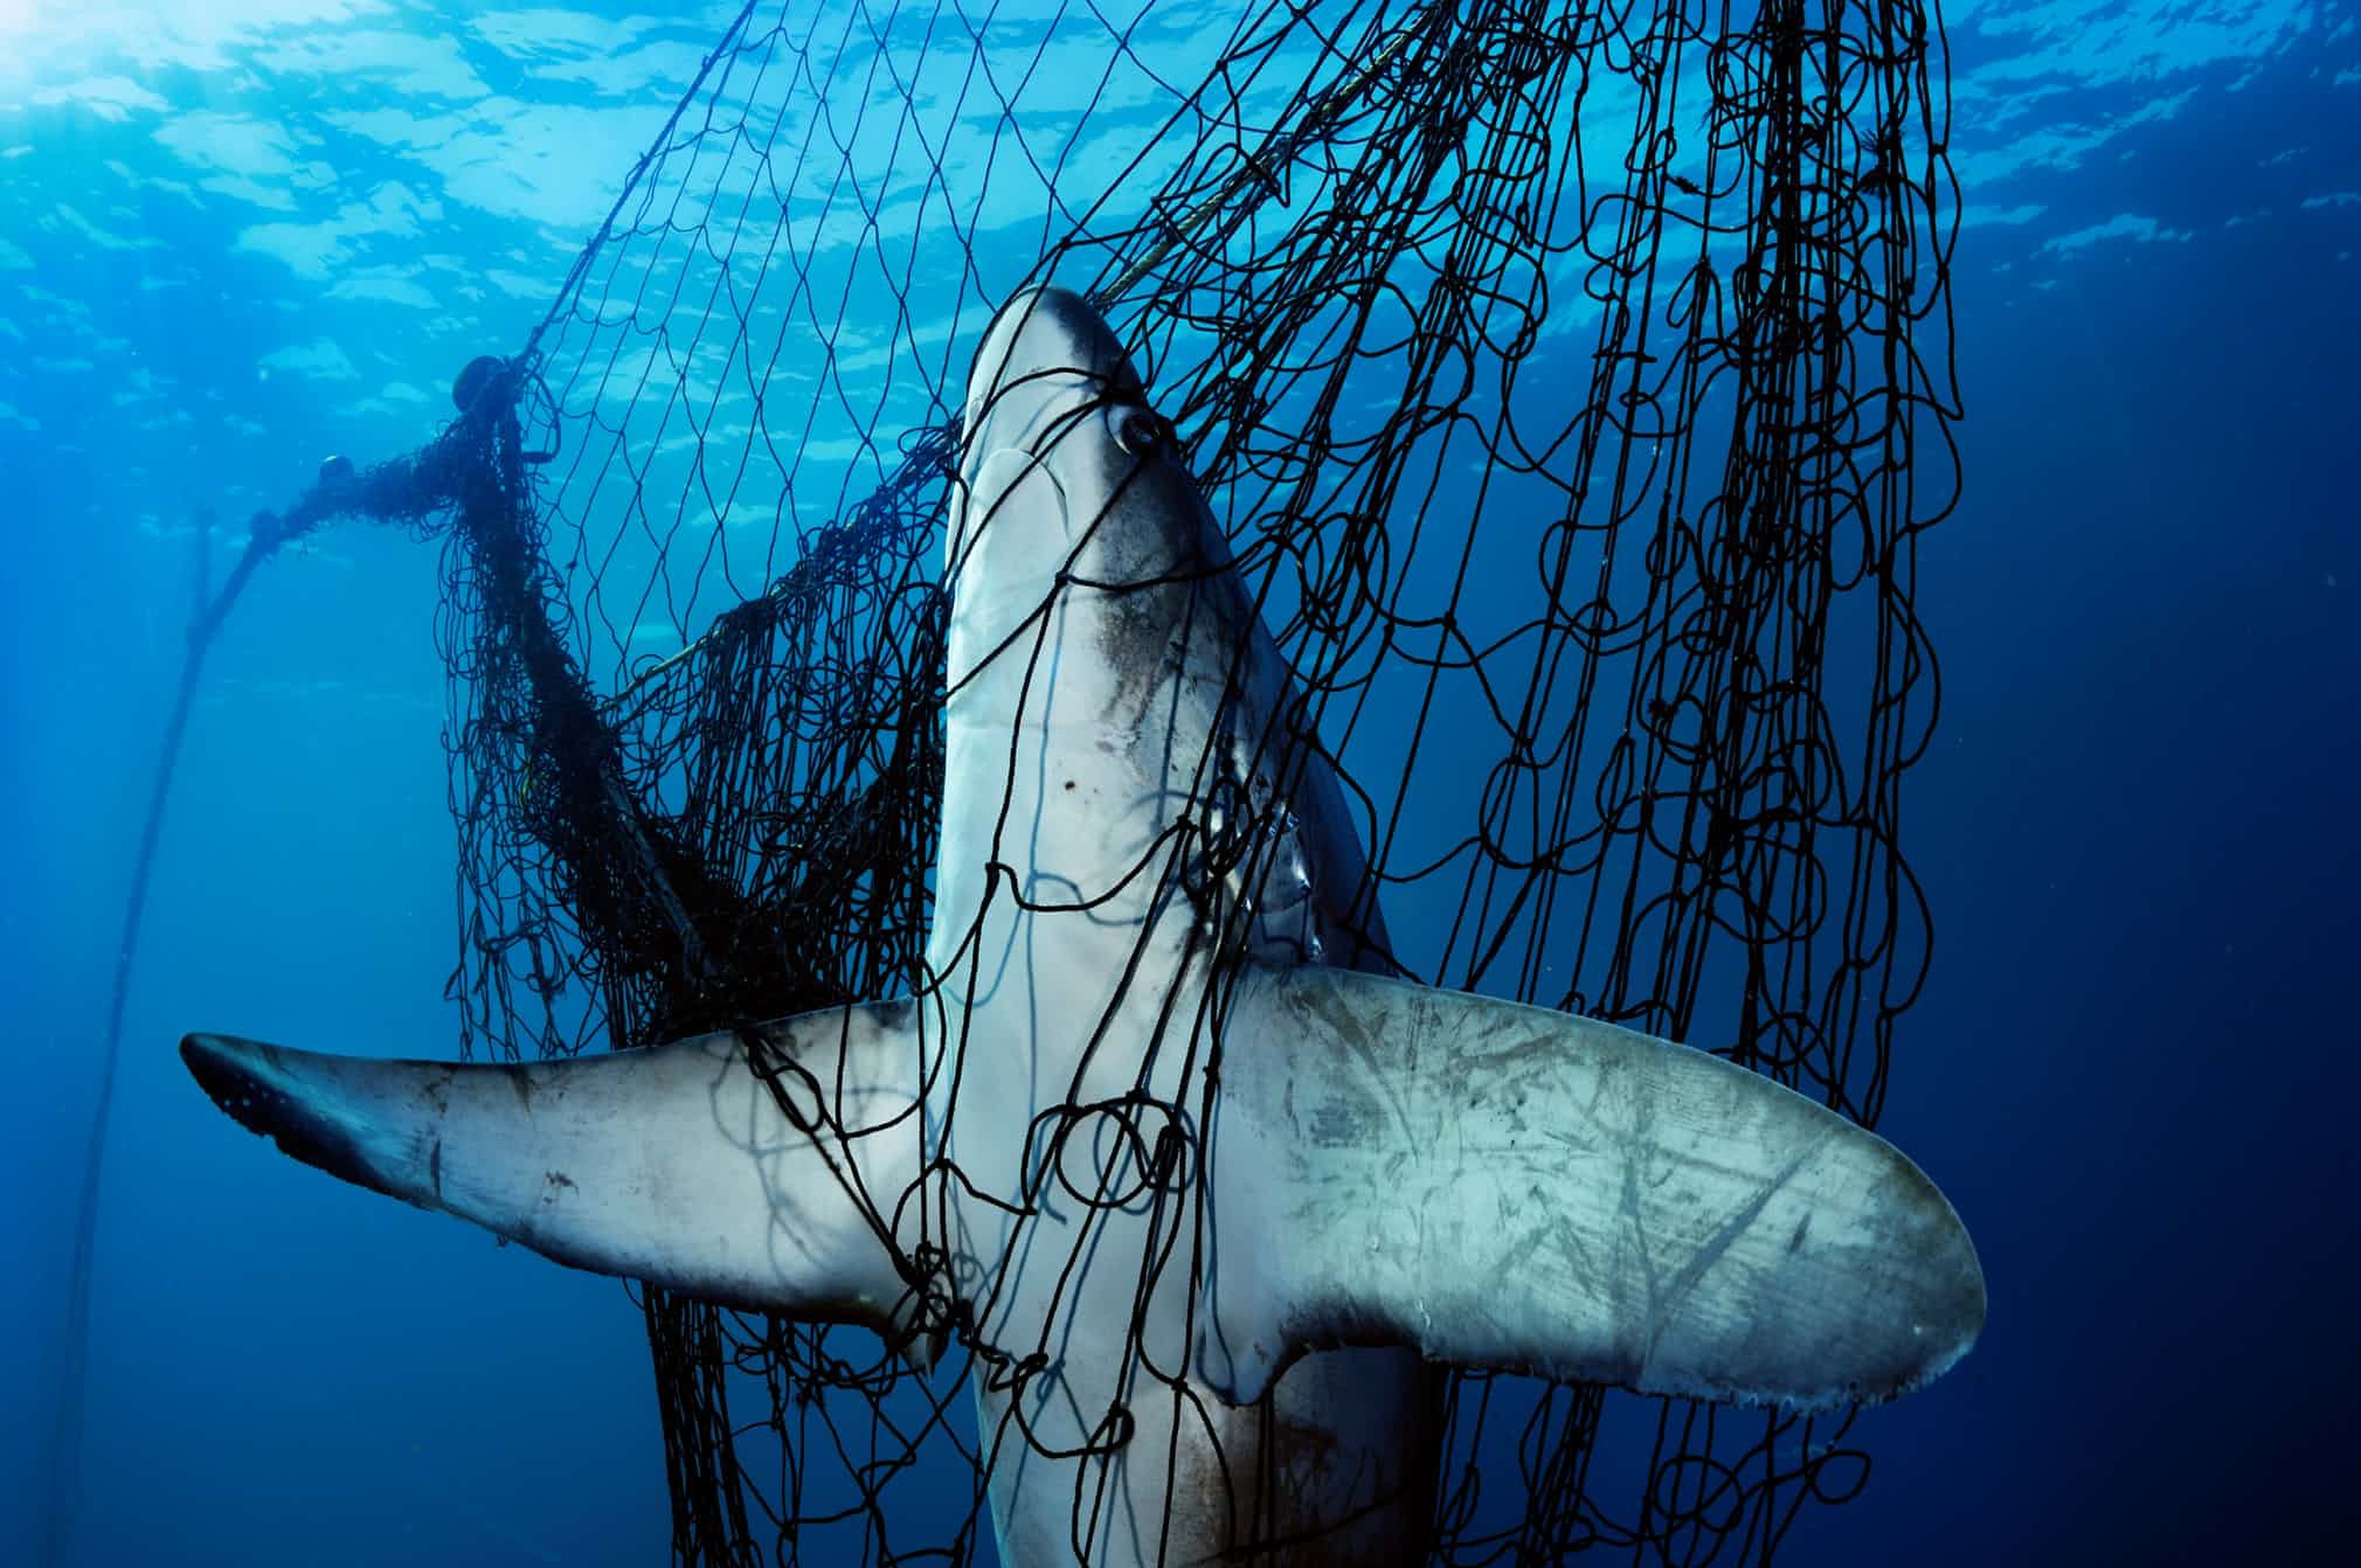 A thresher shark caught in a gillnet in Mexico’s Sea of Cortez. Tens of millions of sharks die each year as victims of fishing by-catch or to satisfy the demand for shark fin soup. Photo: Photographers Against Wildlife Crime